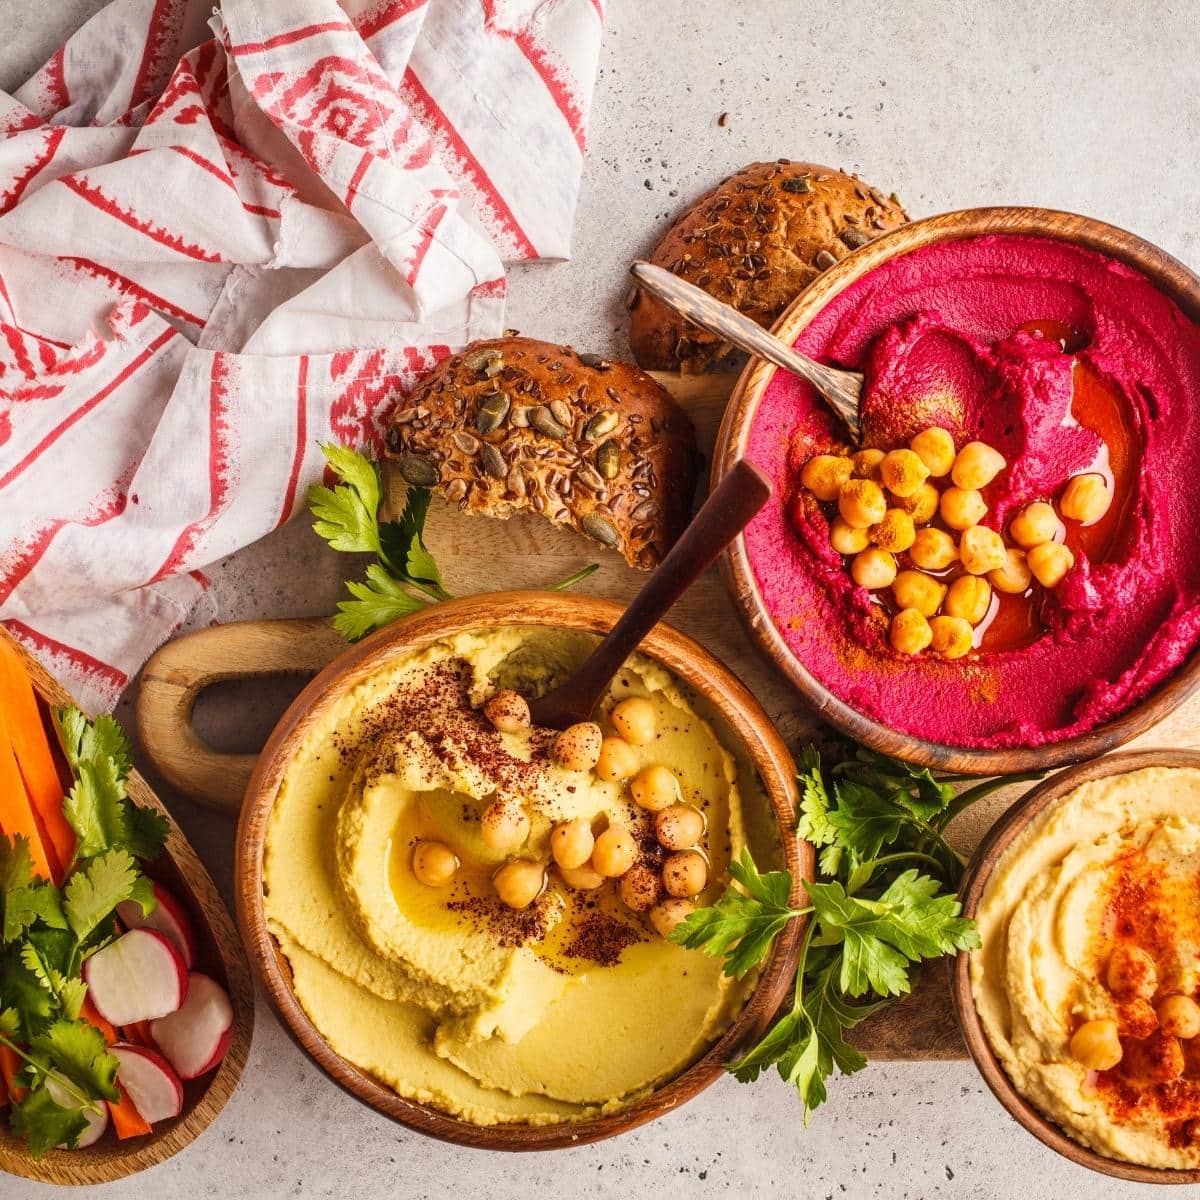 beet hummus, classic hummus and other homemade gluten free hummus varieties in a spread.